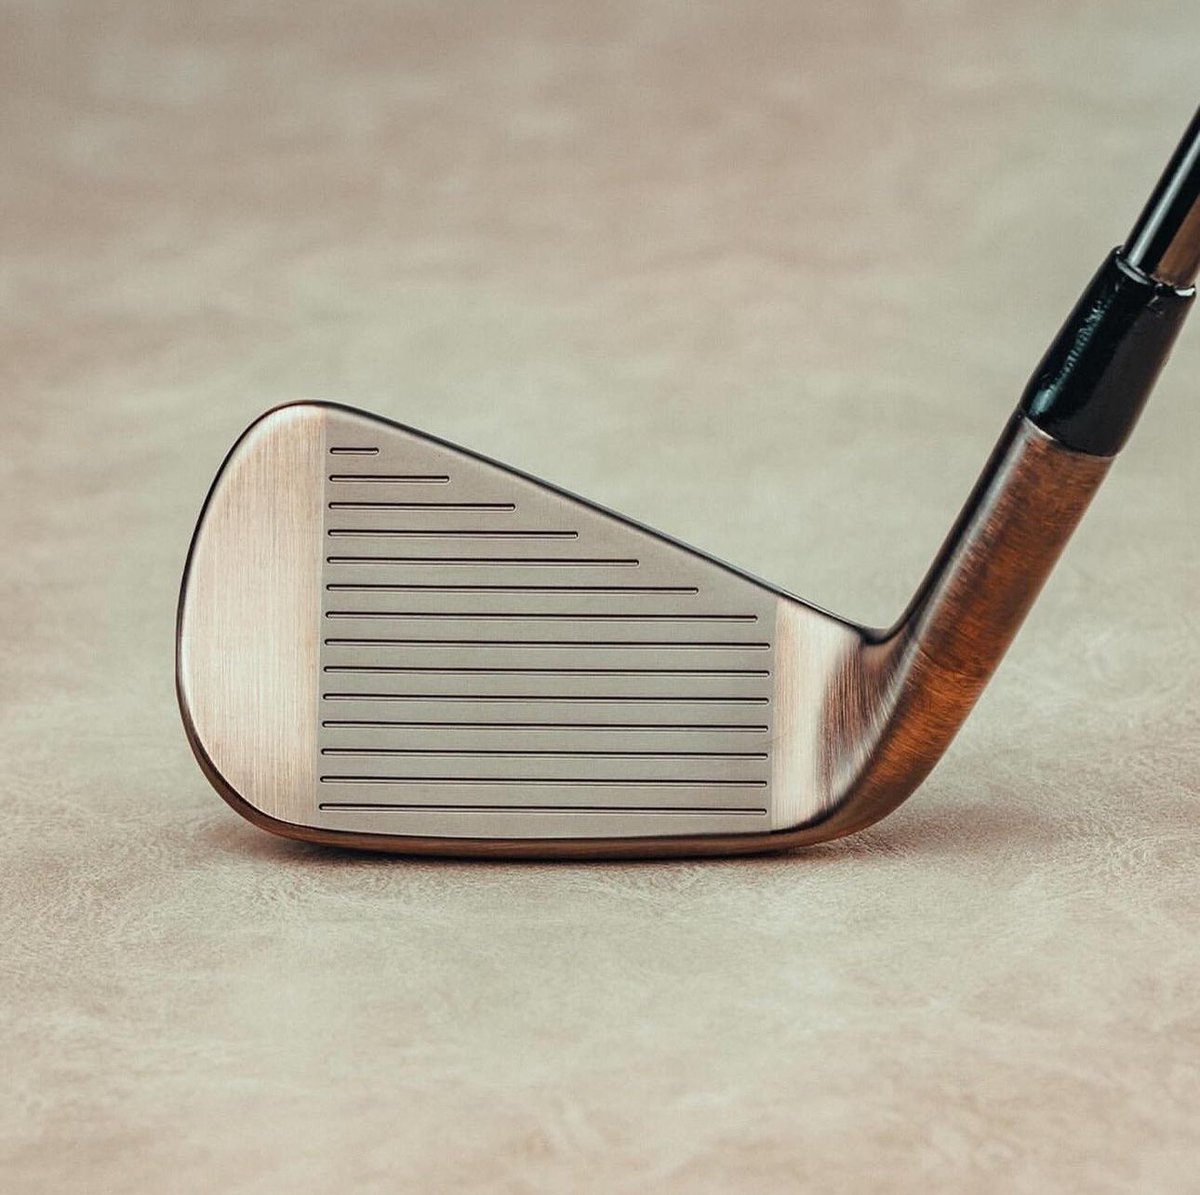 What’s your thoughts on the new aged copper P790’s and P770’s by @taylormadegolf 💭

These have to be some of the best looking clubs to go in the bag 😍👀 Tag someone that needs a set!

#taylormade #p790irons #p770irons #golfclubs